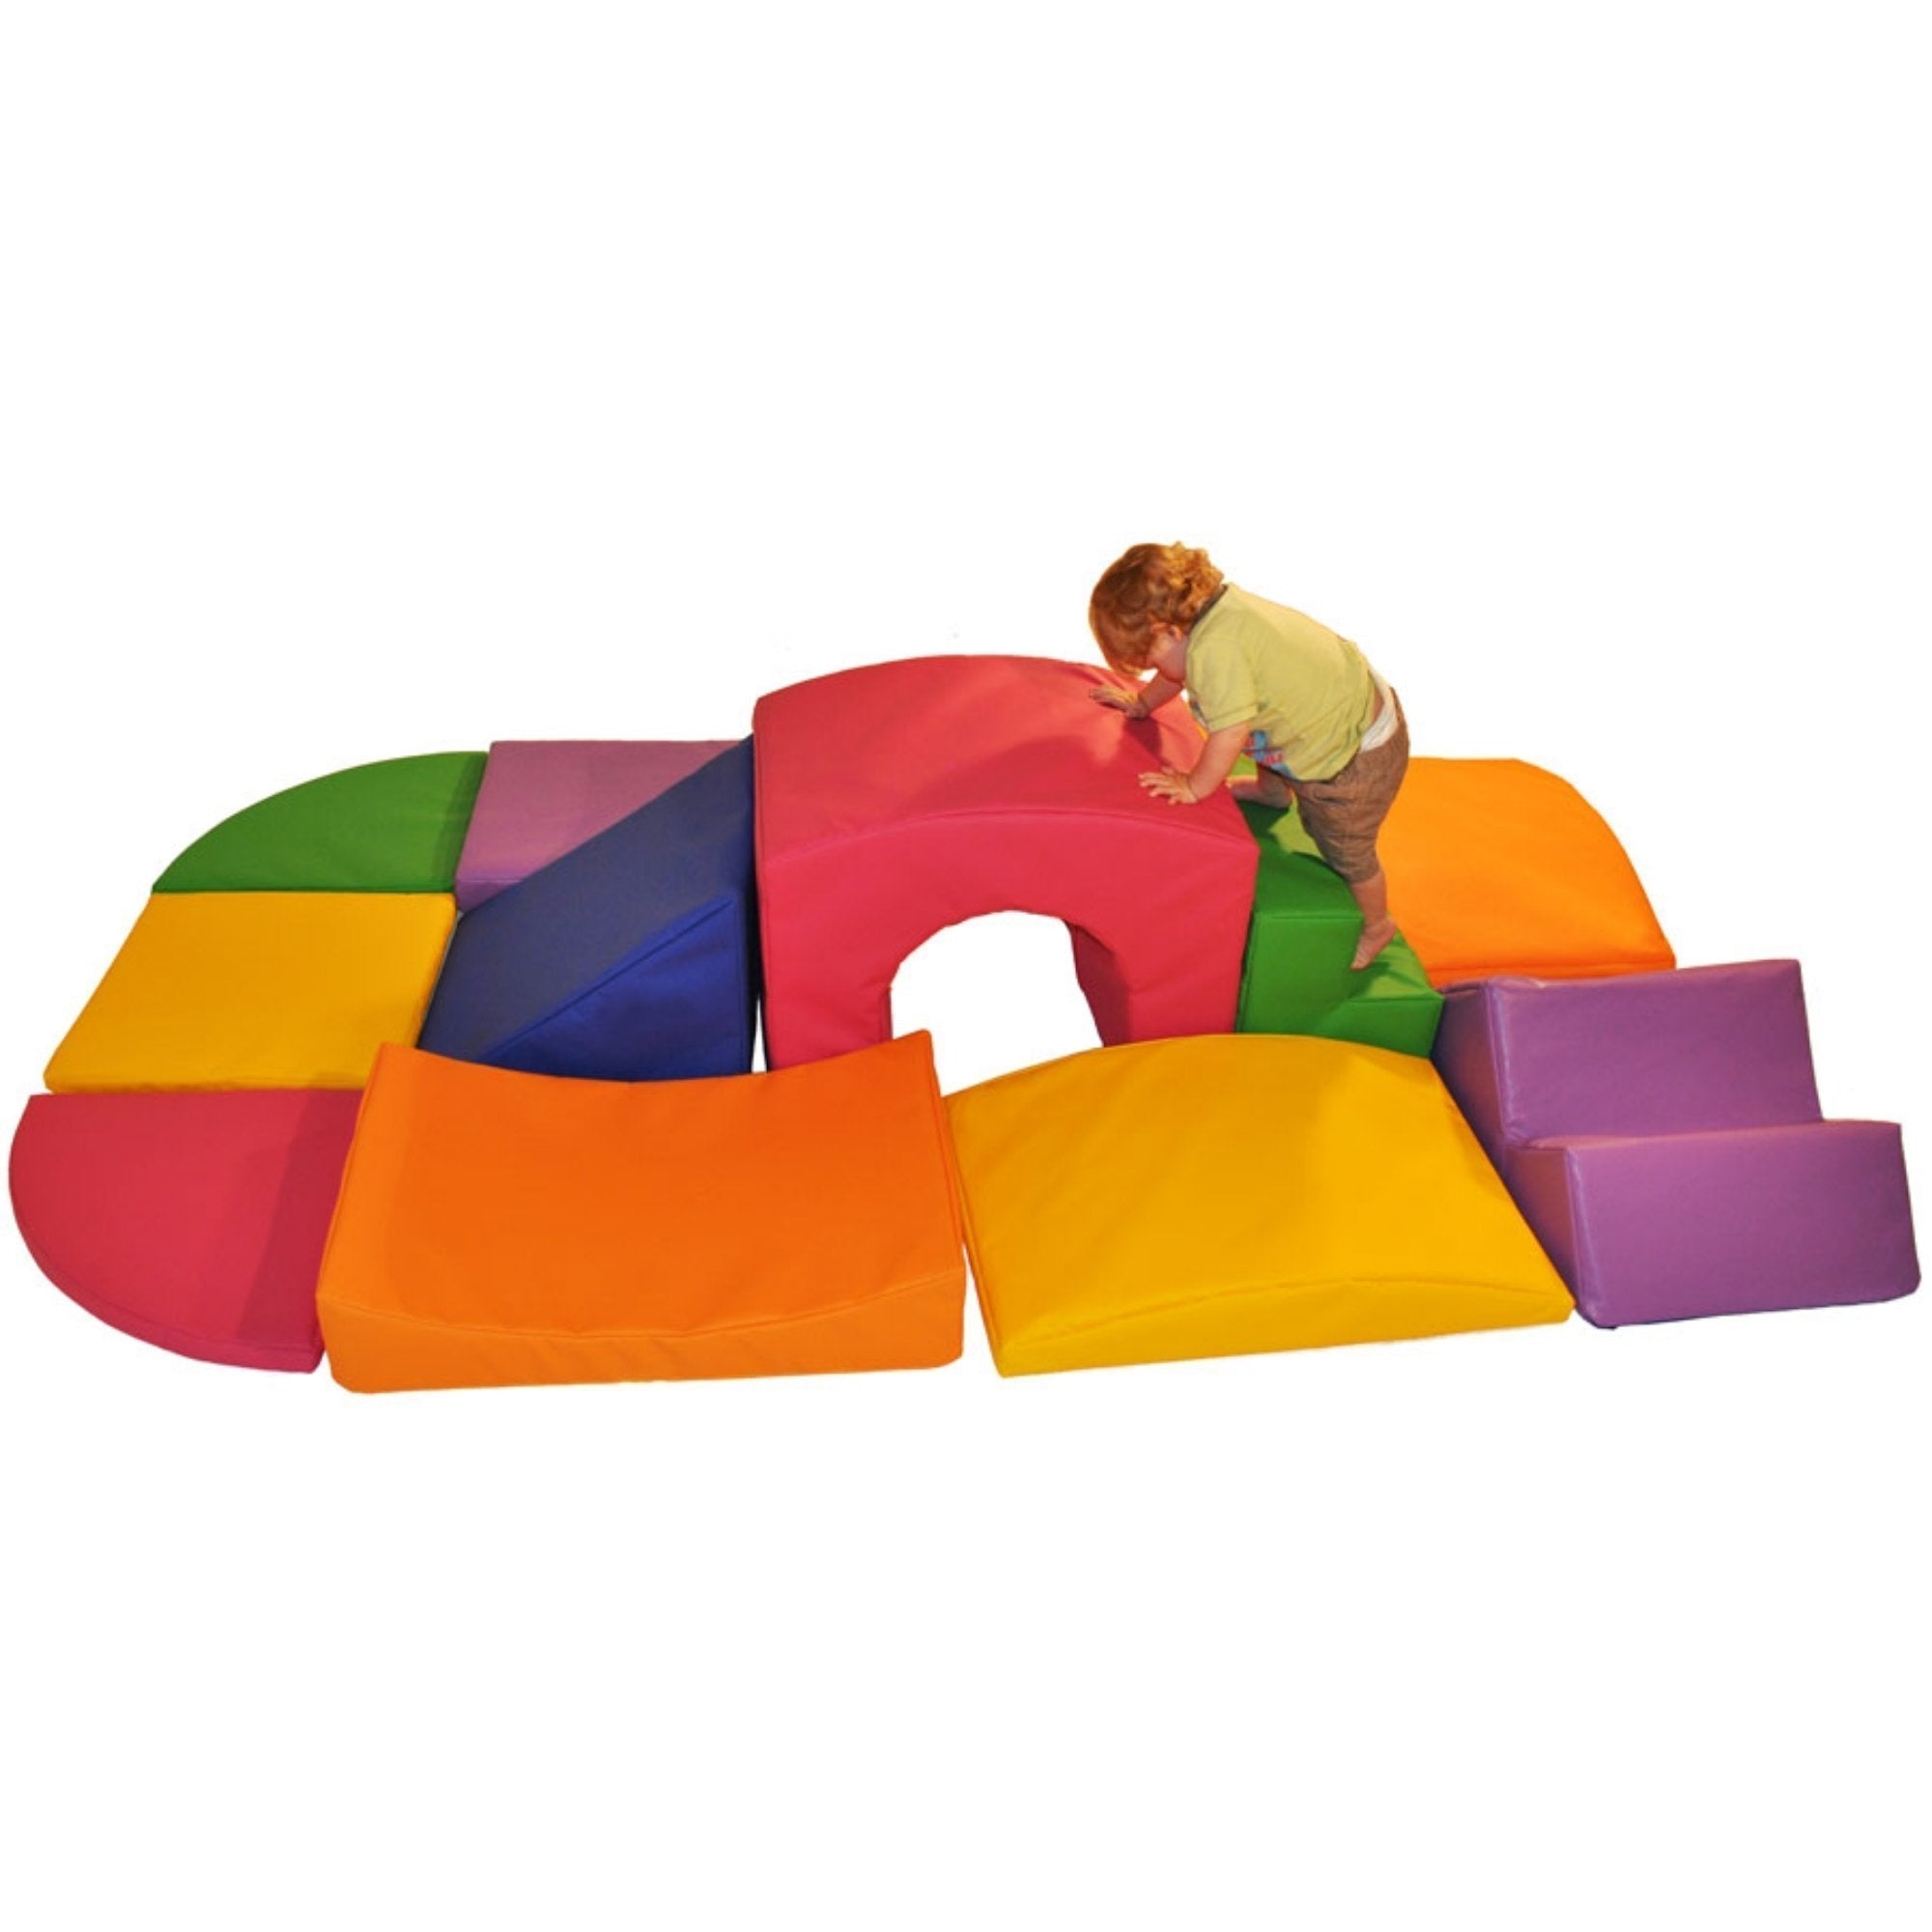 Exploration Area 8 Piece Soft Play Set, The Exploration Area 8 Piece Soft Play Set is a fantastic piece of Soft Play that will add colour, style and value to any setting. The Exploration Area 8 Piece Soft Play Set is designed to be used by both babies and toddlers, making it extremely versatile. The individual shapes provide a soft and interesting floor to crawl over, or a challenging uneven surface for toddlers to walk on with the taller pieces used for support. The different shapes add a challenge and bui